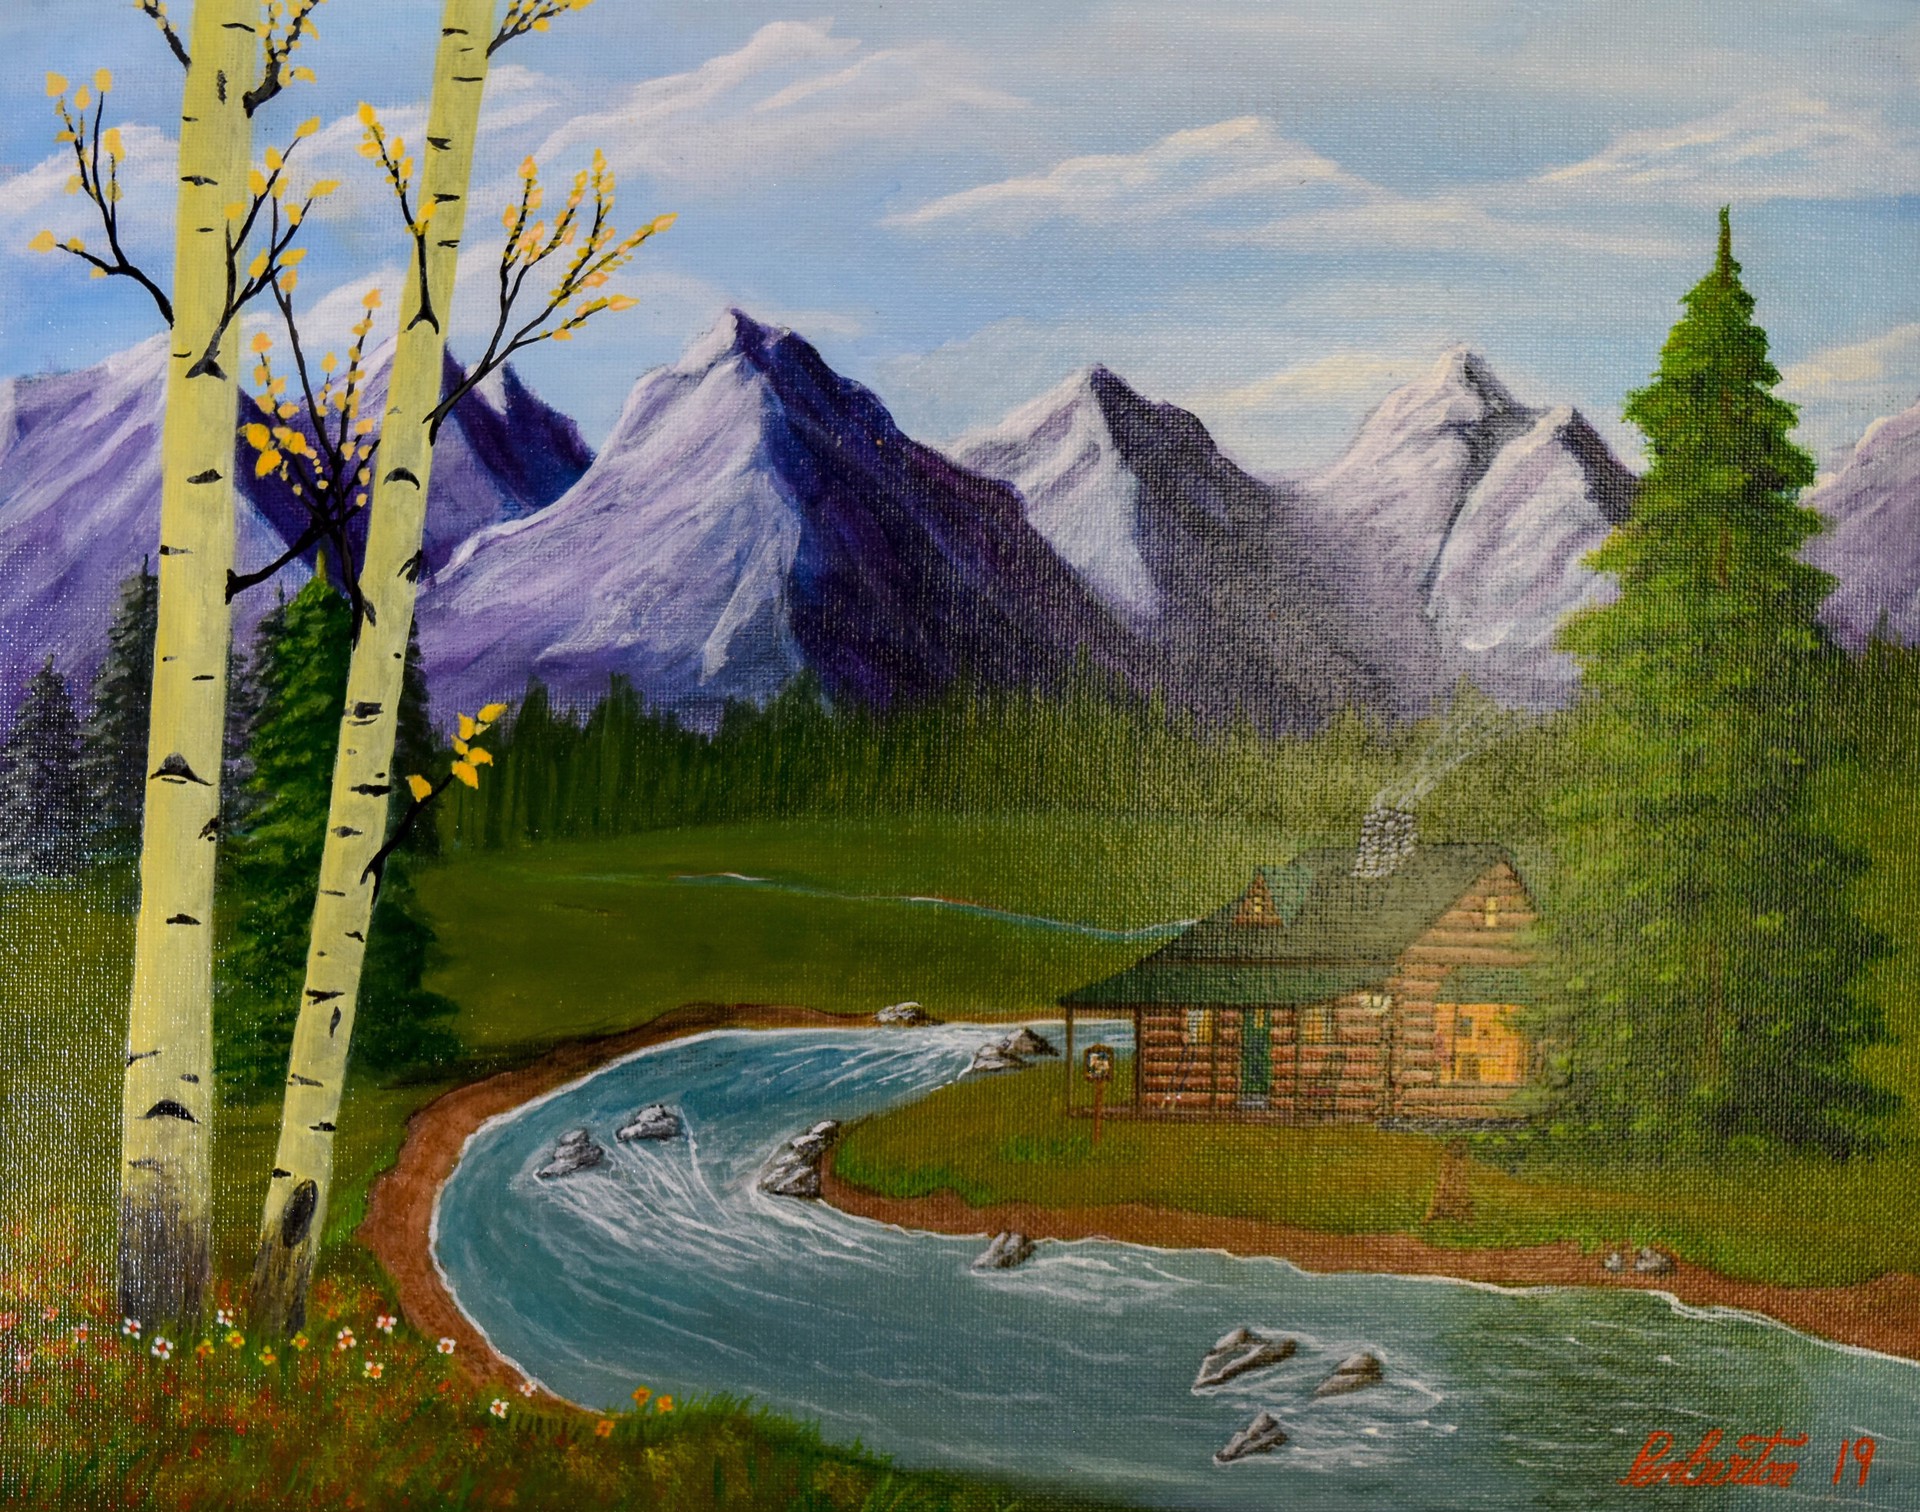 Cabin by the Mountainside by Robert Pemberton